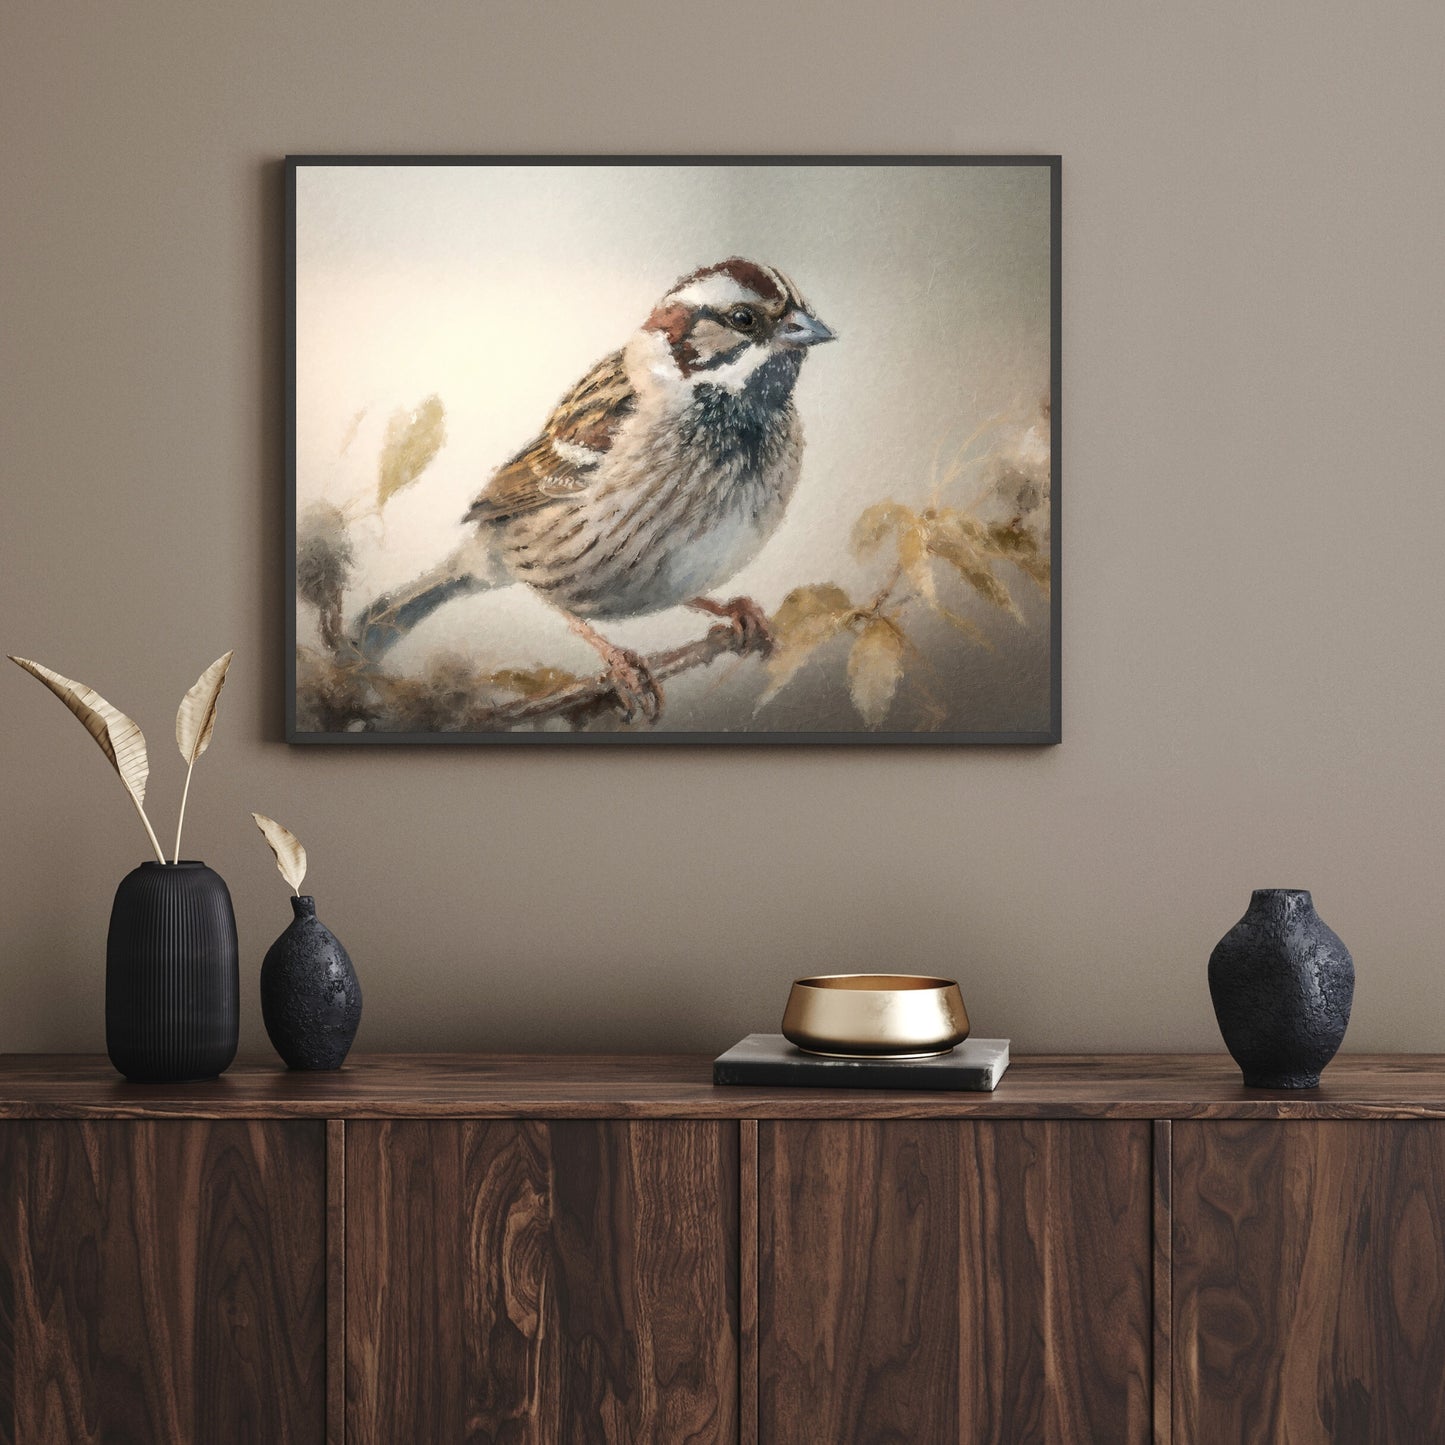 Vintage Bird Painting Paper Poster Prints Vintage Oil Painting Style & Wall Art of a Sparrow sitting on a twig, birding print